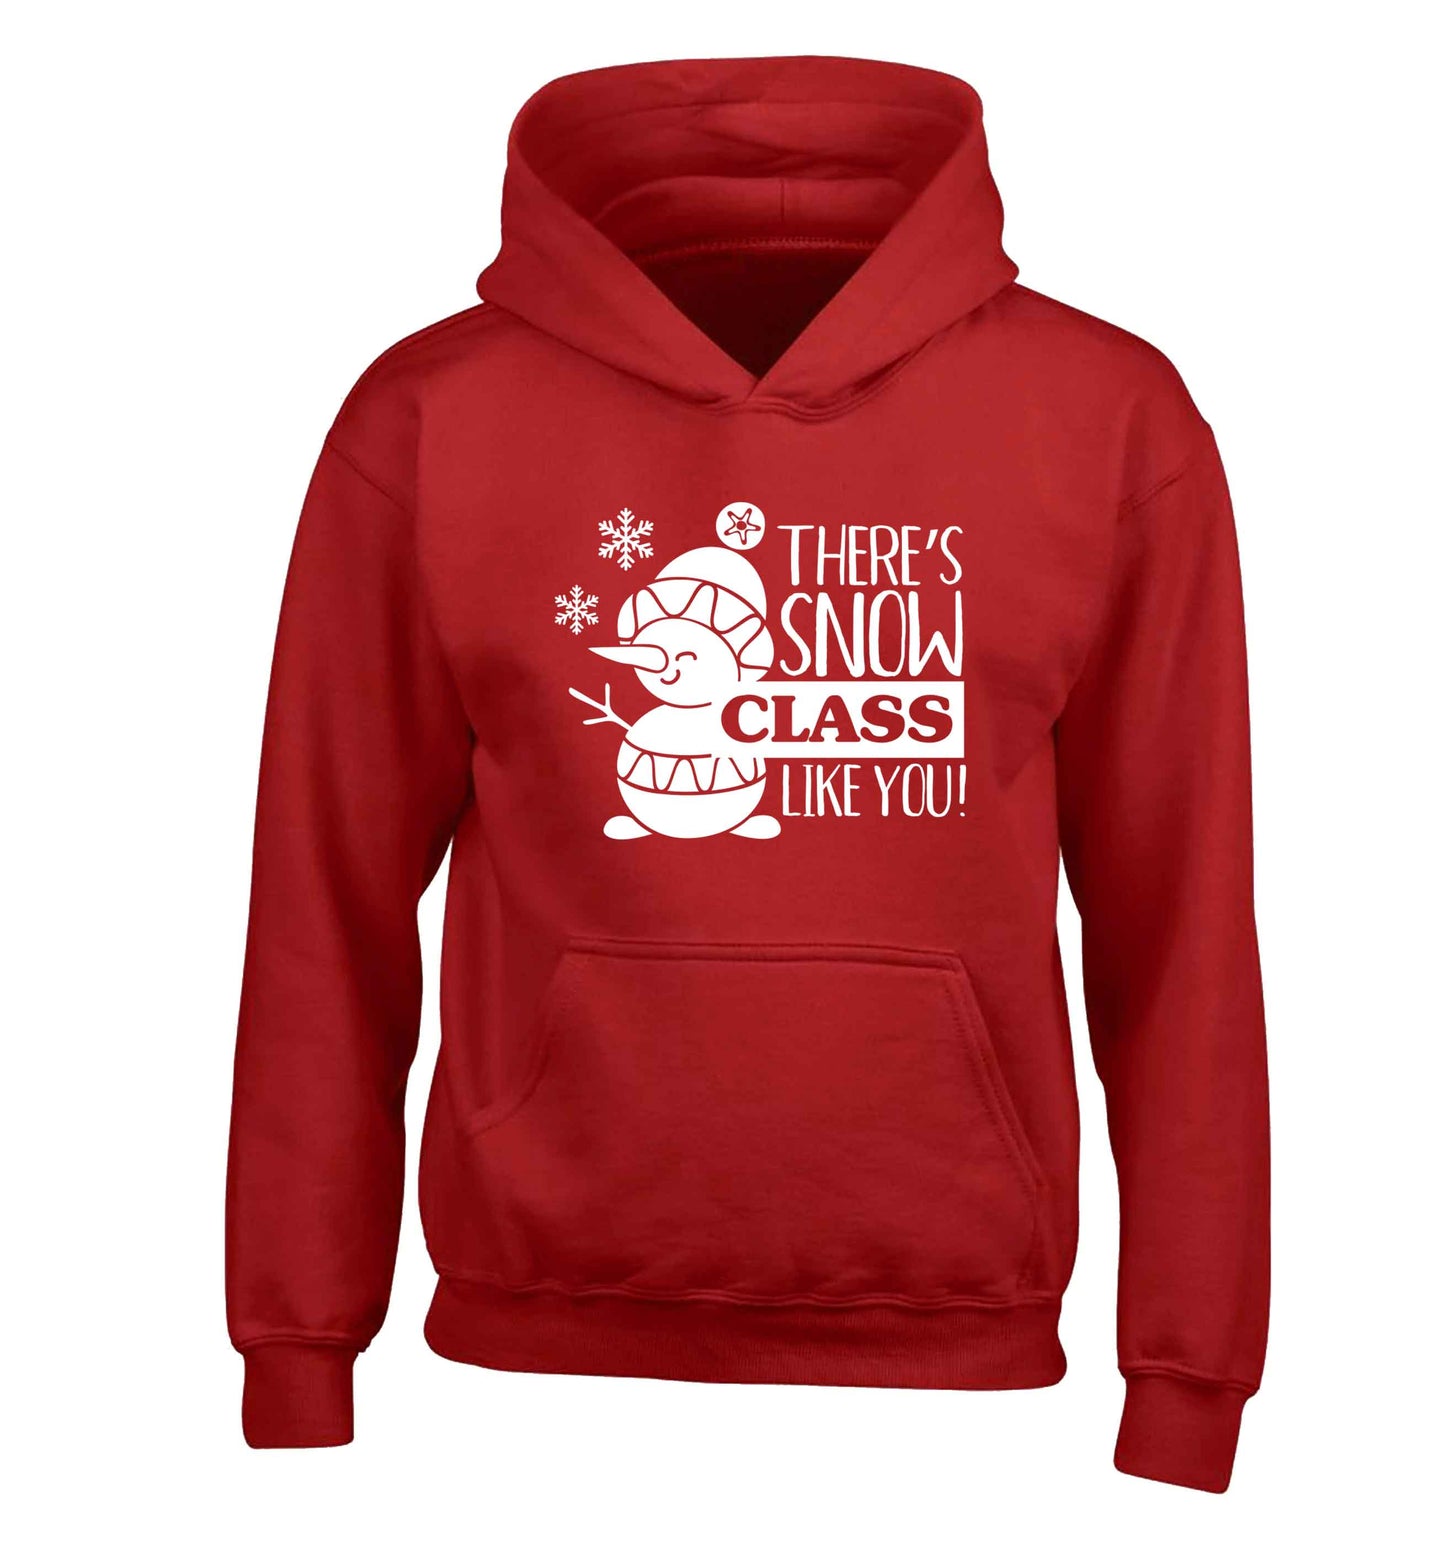 There's snow class like you children's red hoodie 12-13 Years